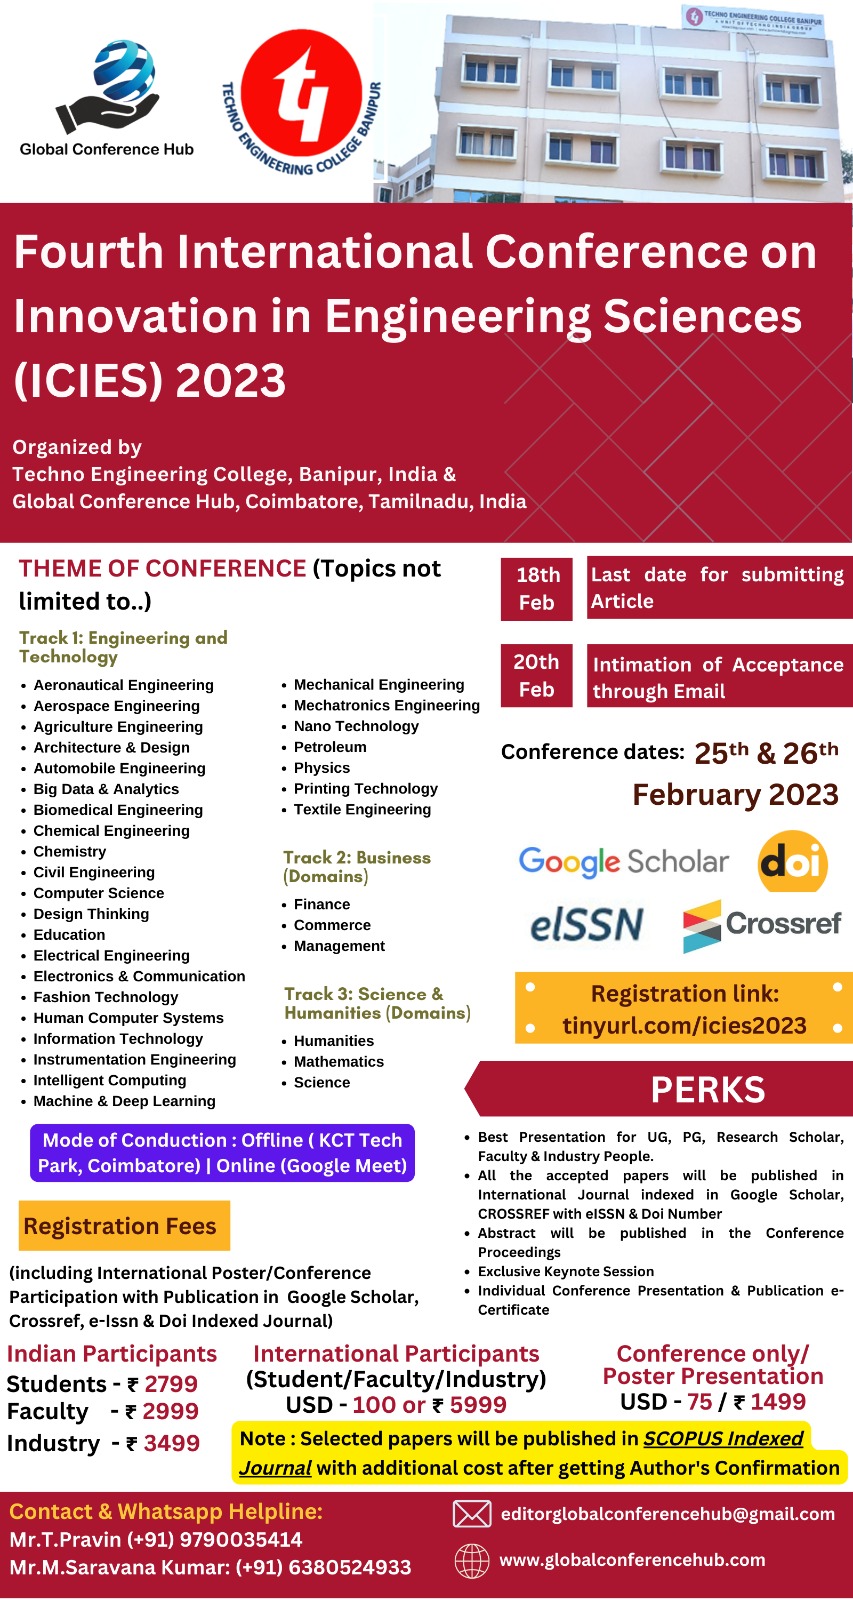 Fourth International Conference on Innovation in Engineering Sciences ICIES 2023